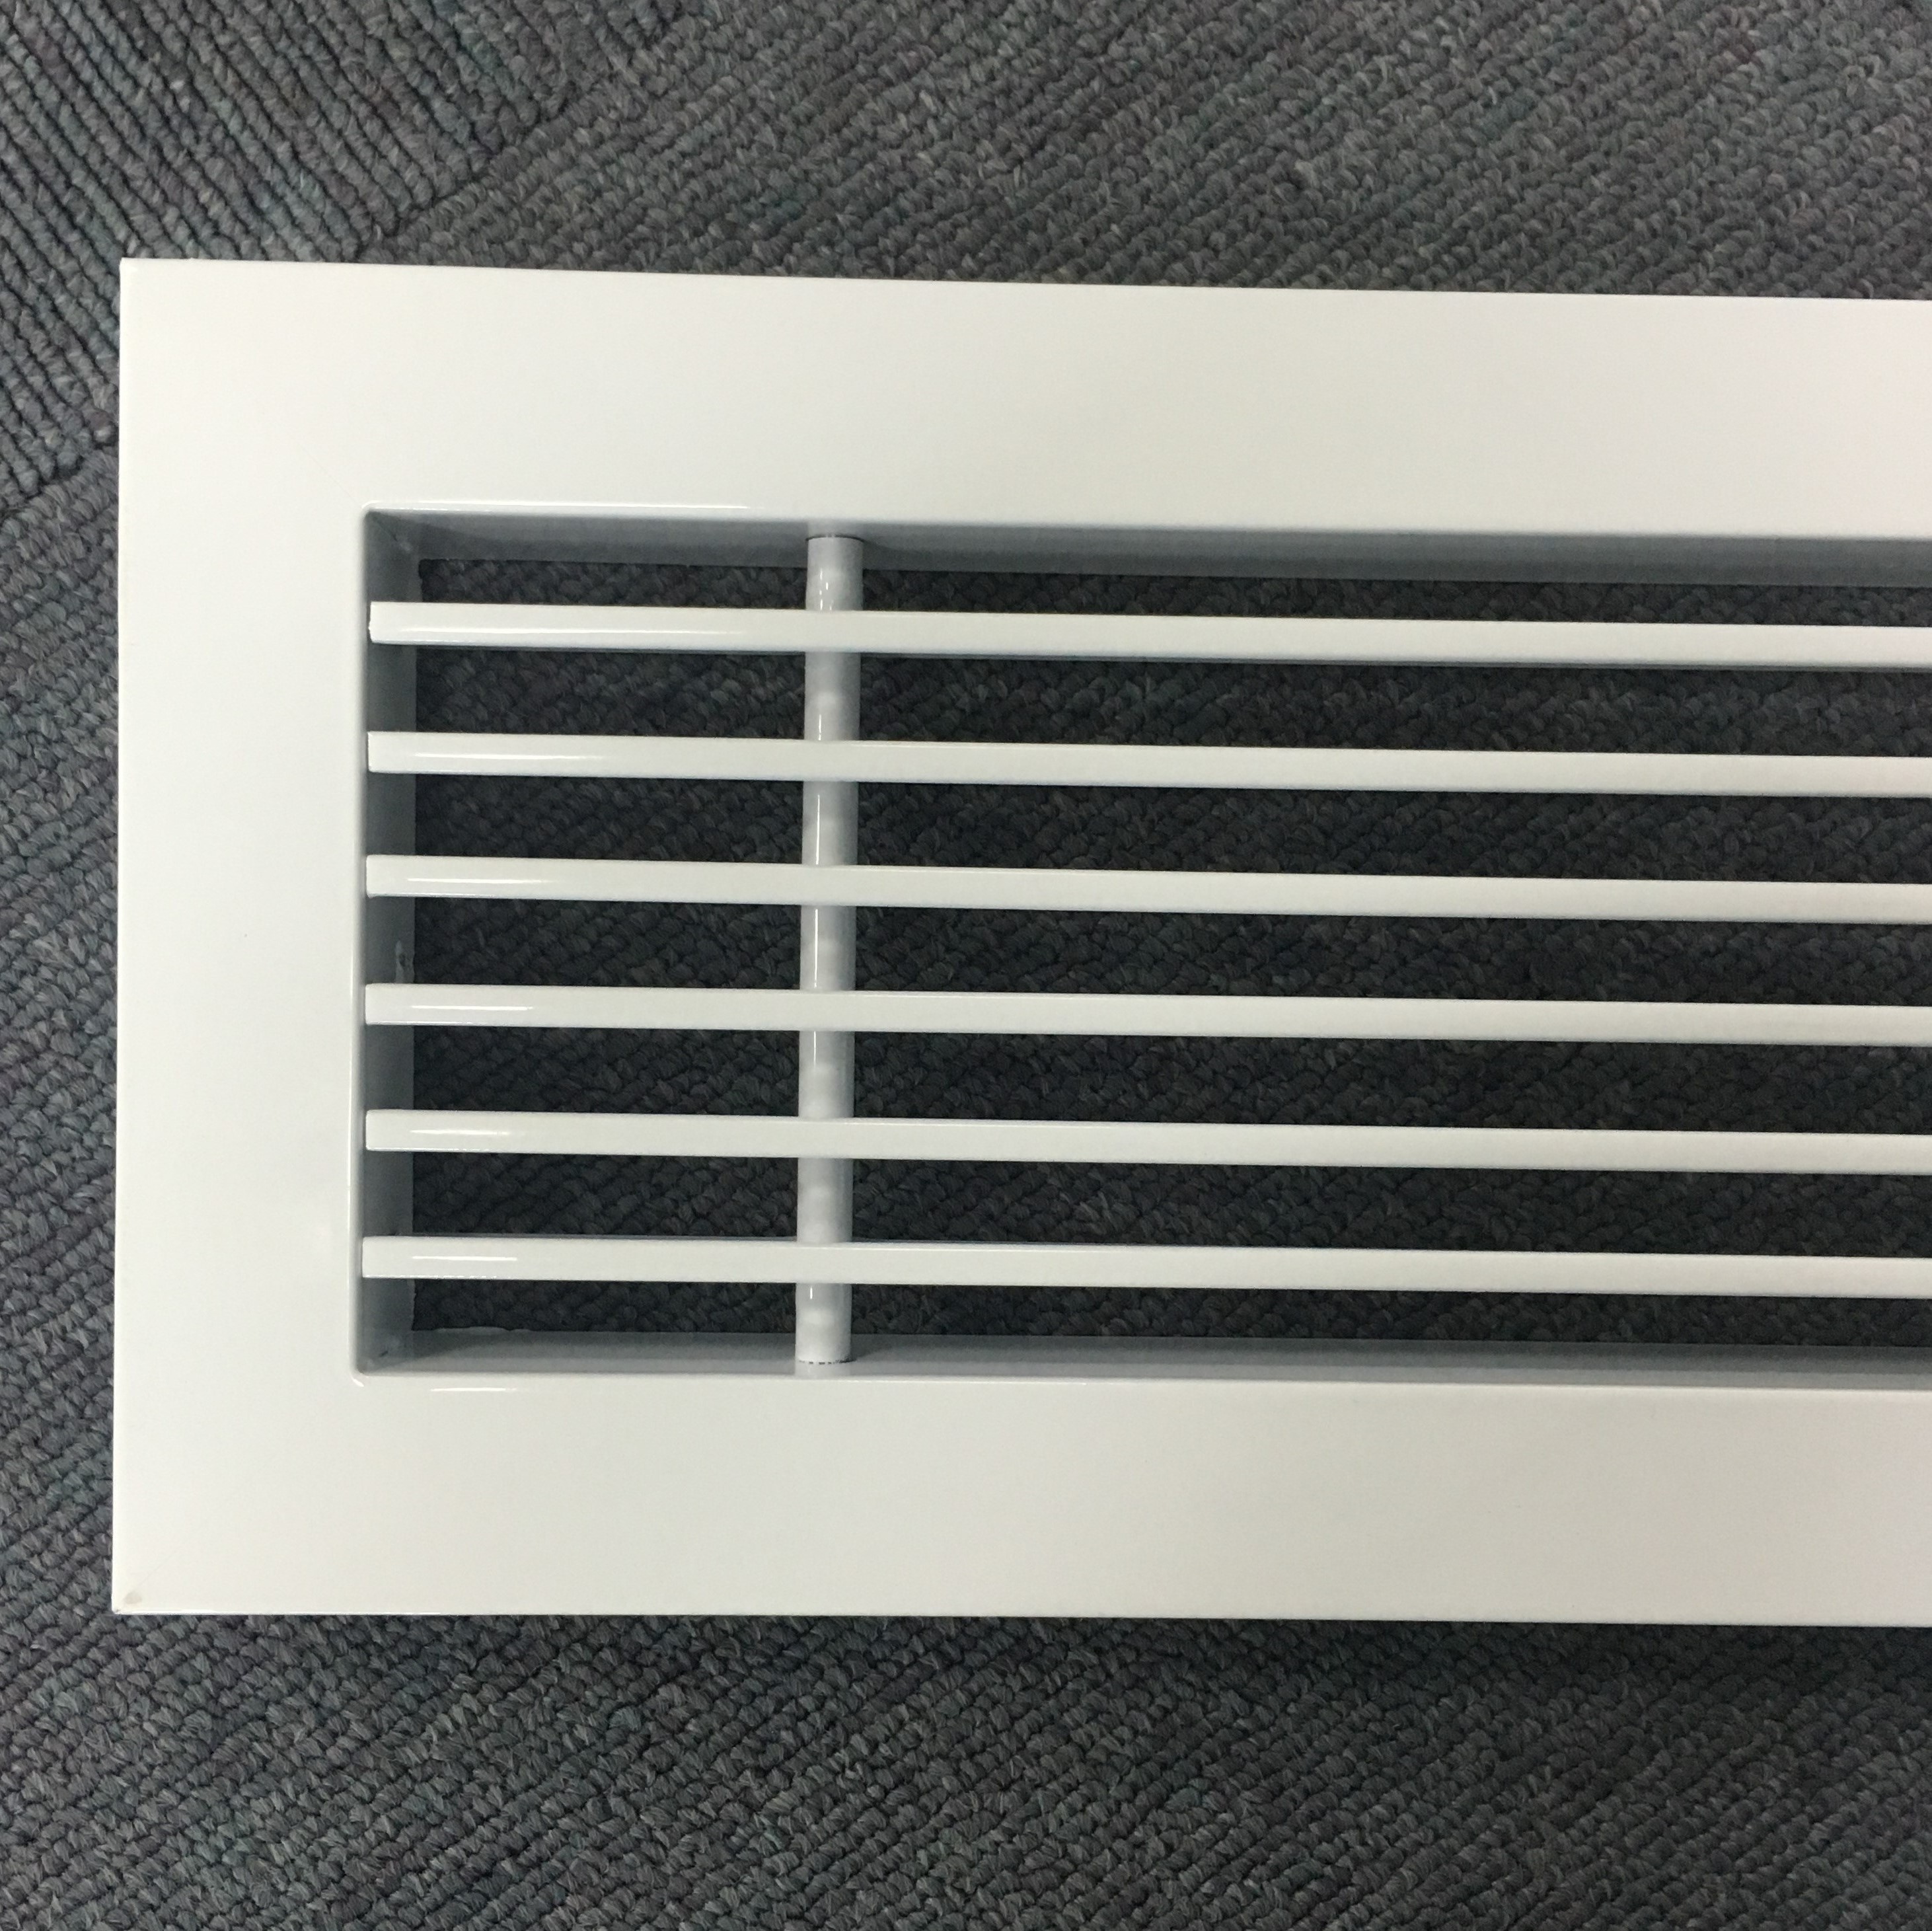 Hvac System Grilles Plastic Return High Quality Double Deflection Supply  Air Grille For Ventilation-Ventech